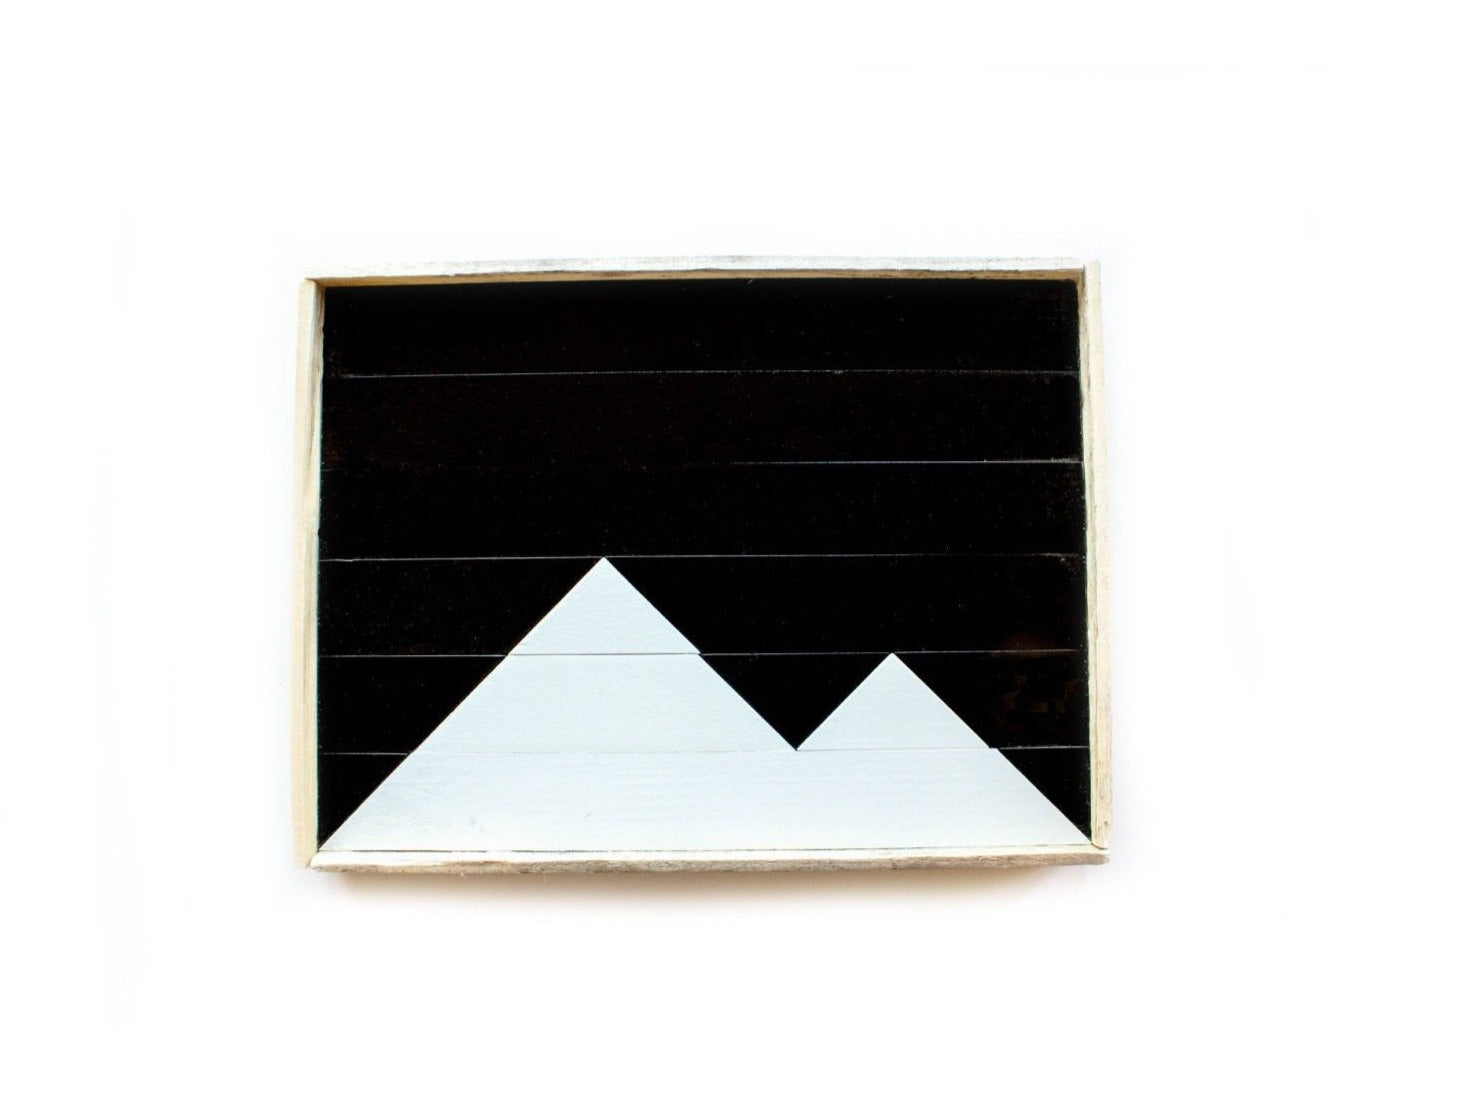 Serving Tray - Black and White Mountains